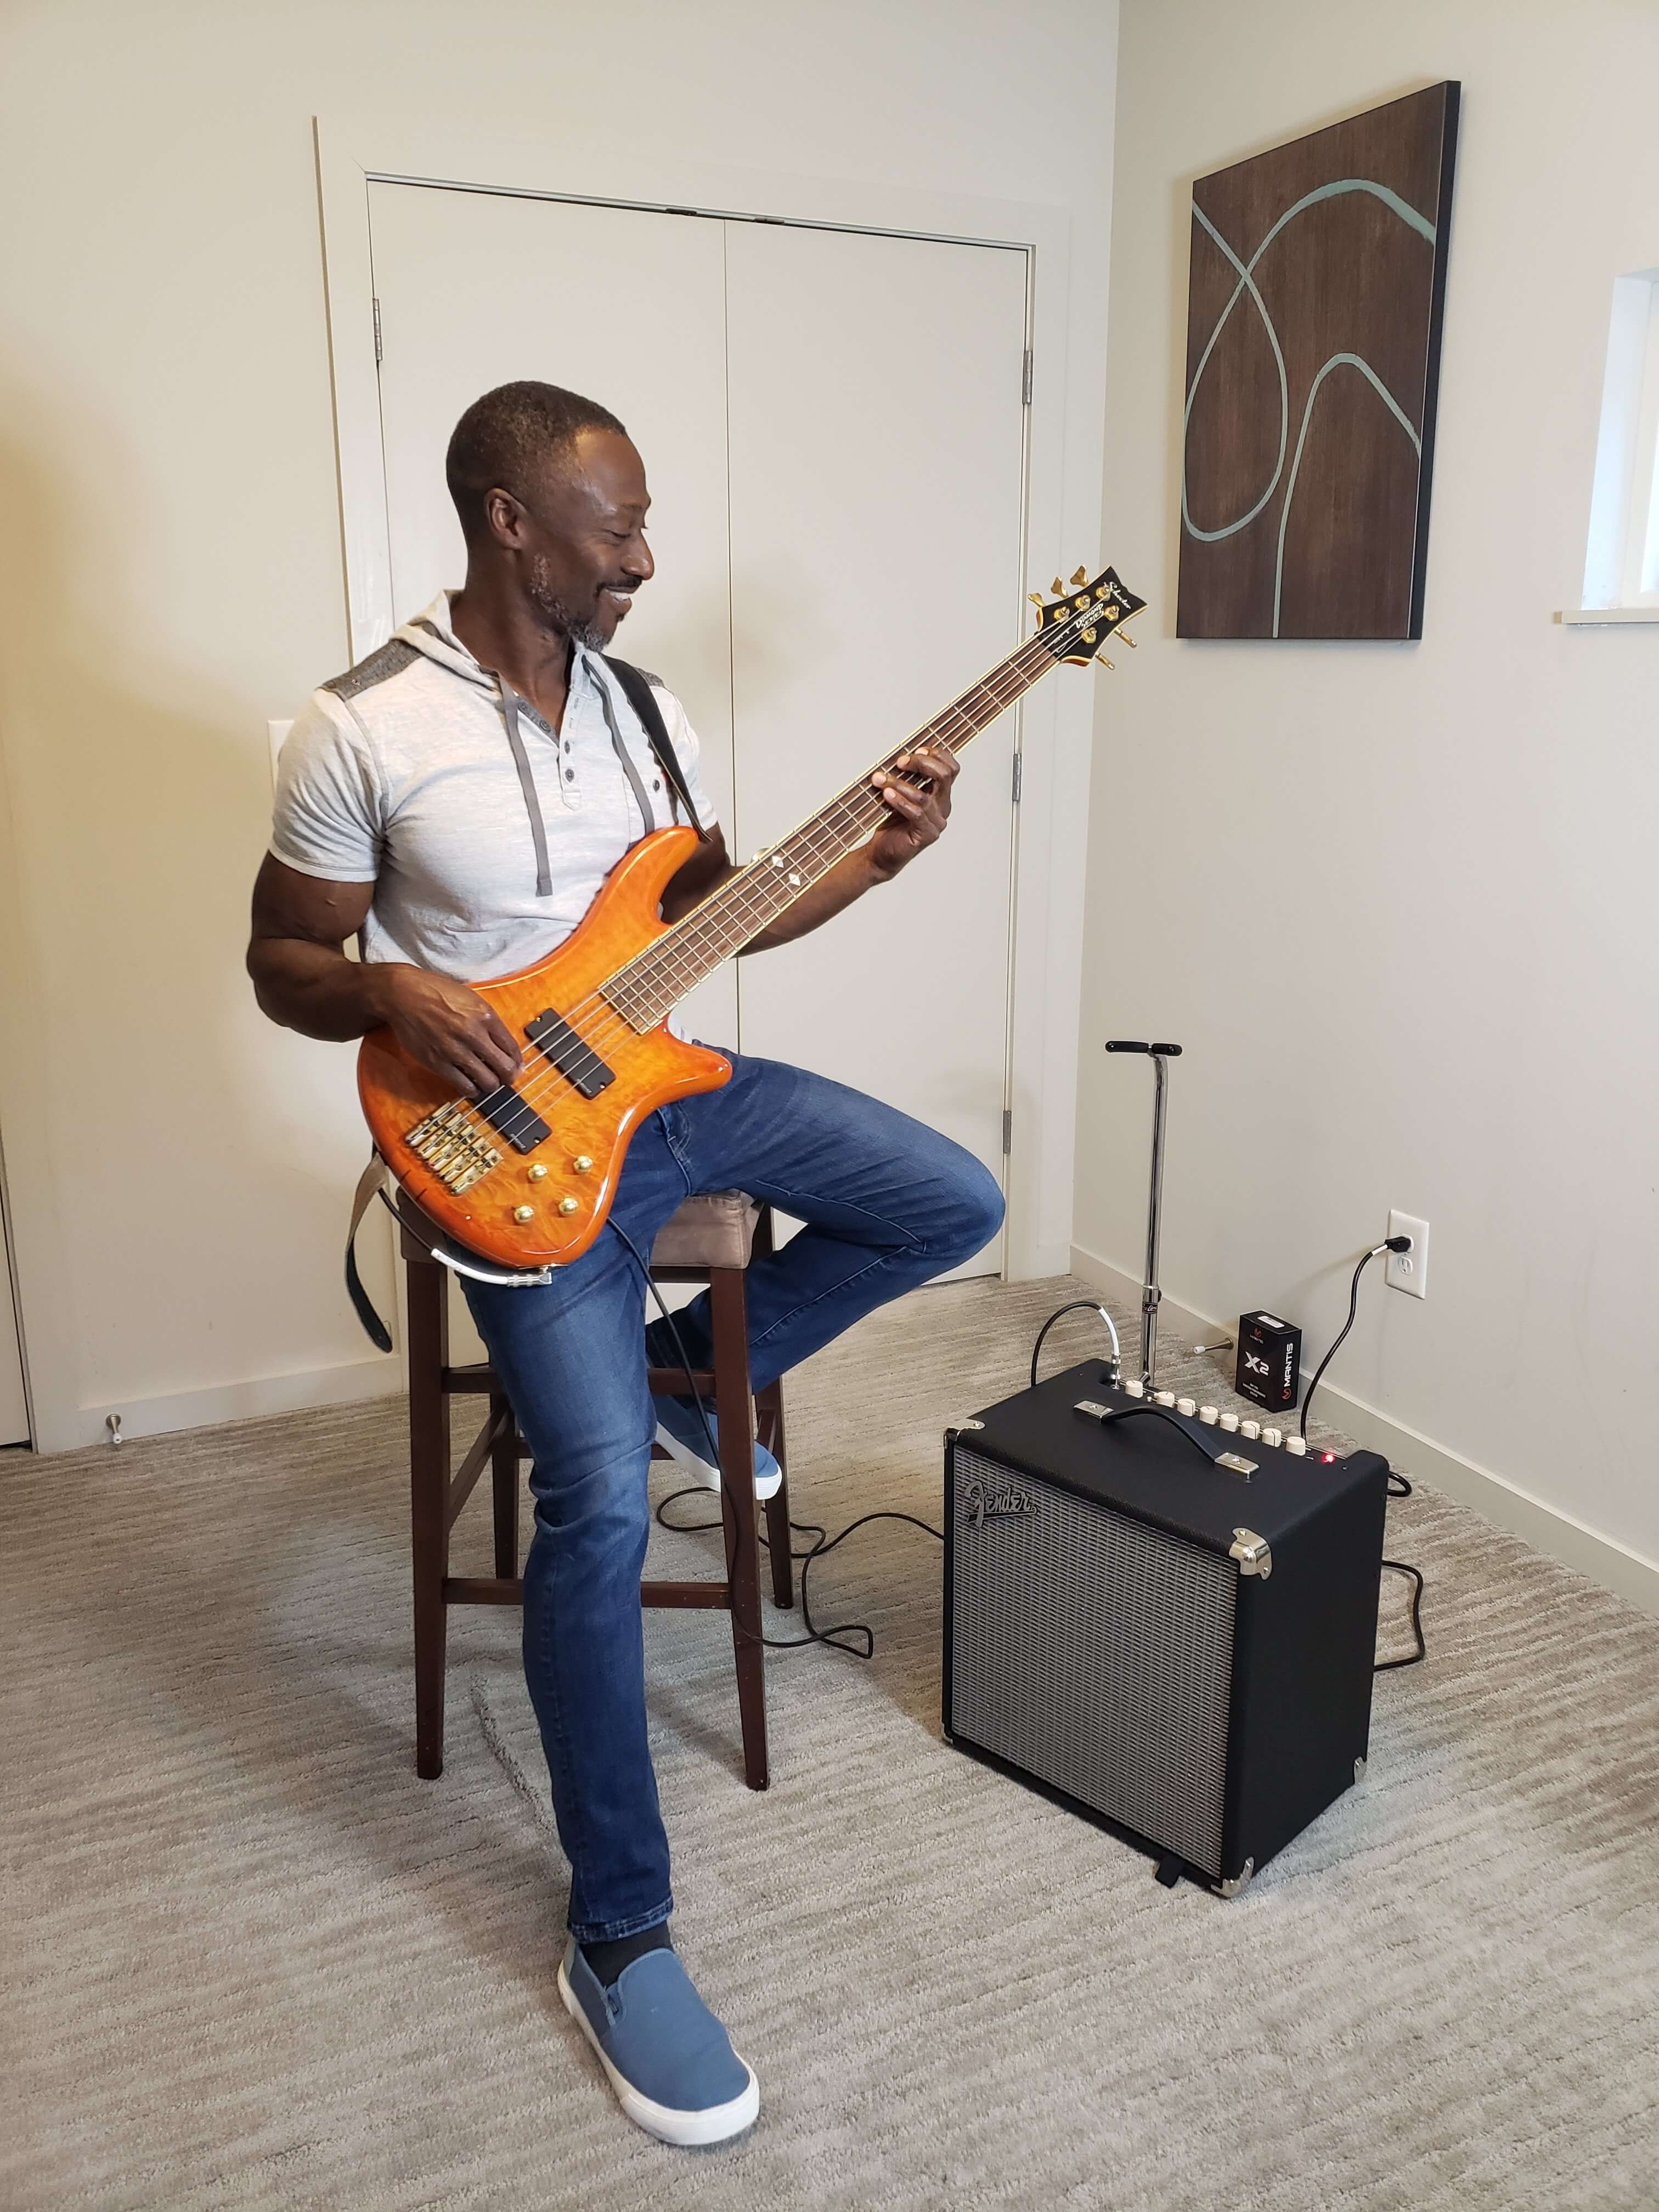 Godfrey Gaisie plays the bass at home